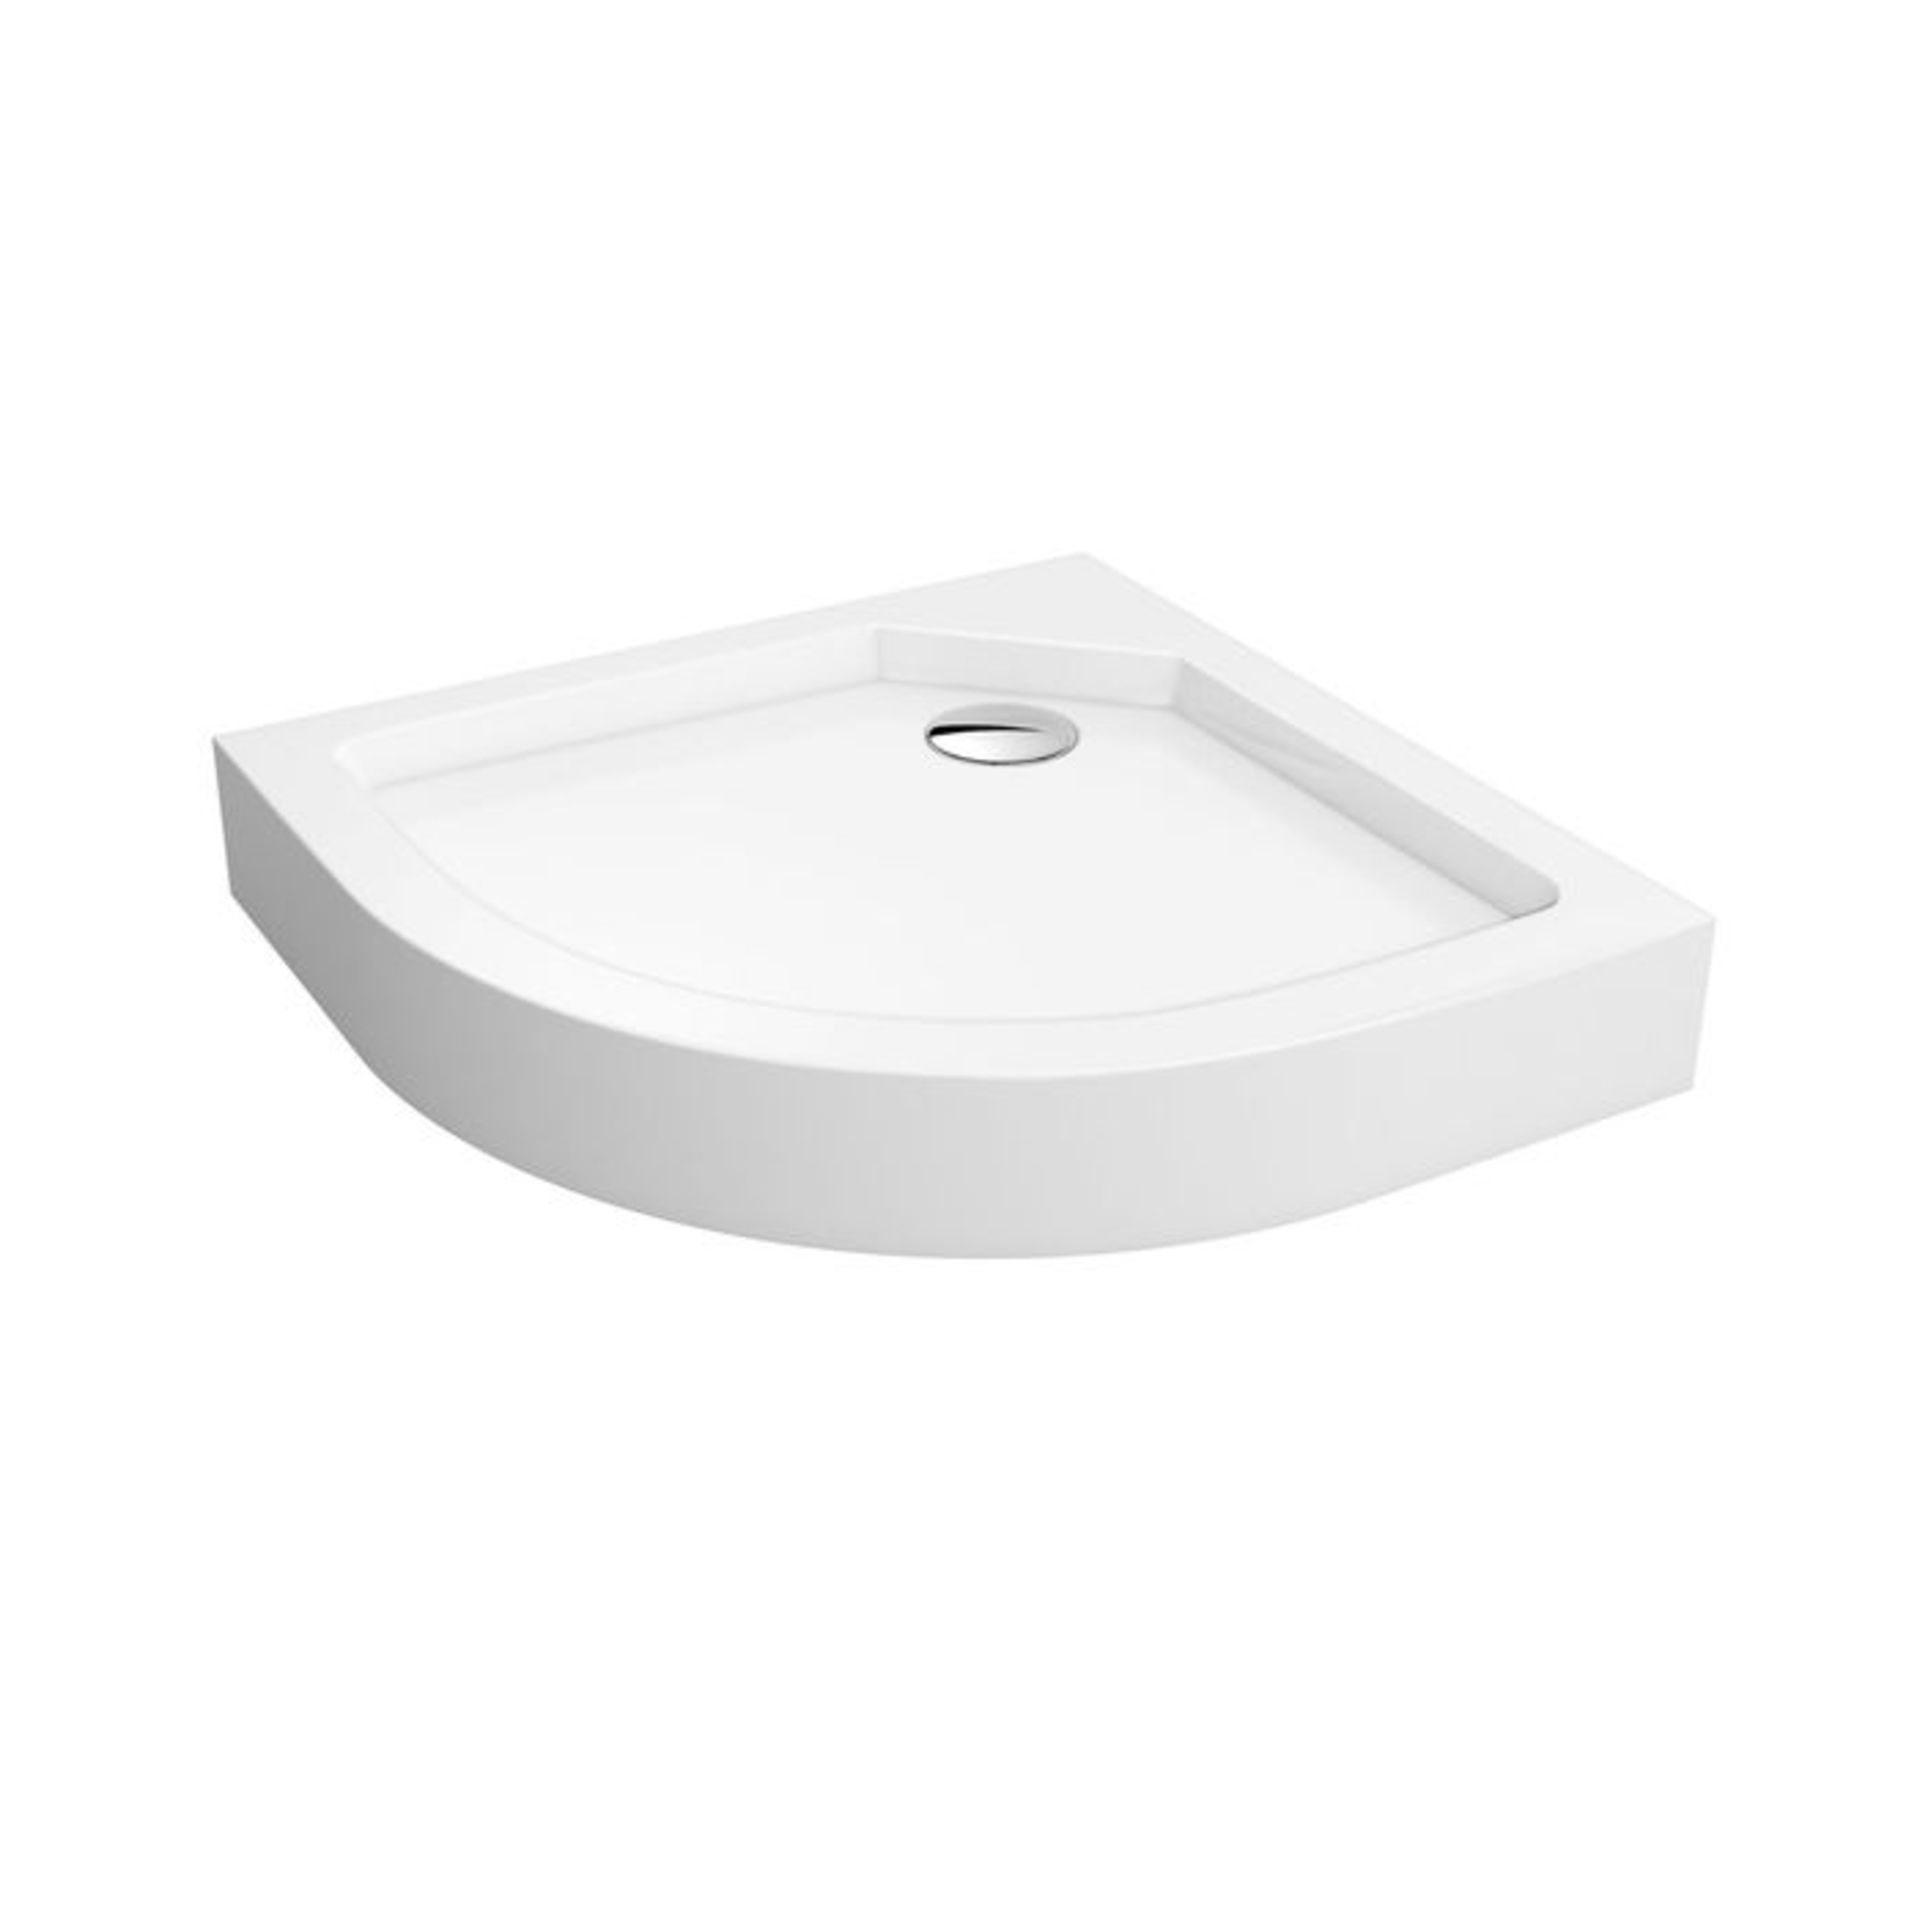 (ZZ177) 800x800mm Quadrant Easy Plumb Shower Tray. RRP £114.99. Easy to clean waste containerMade